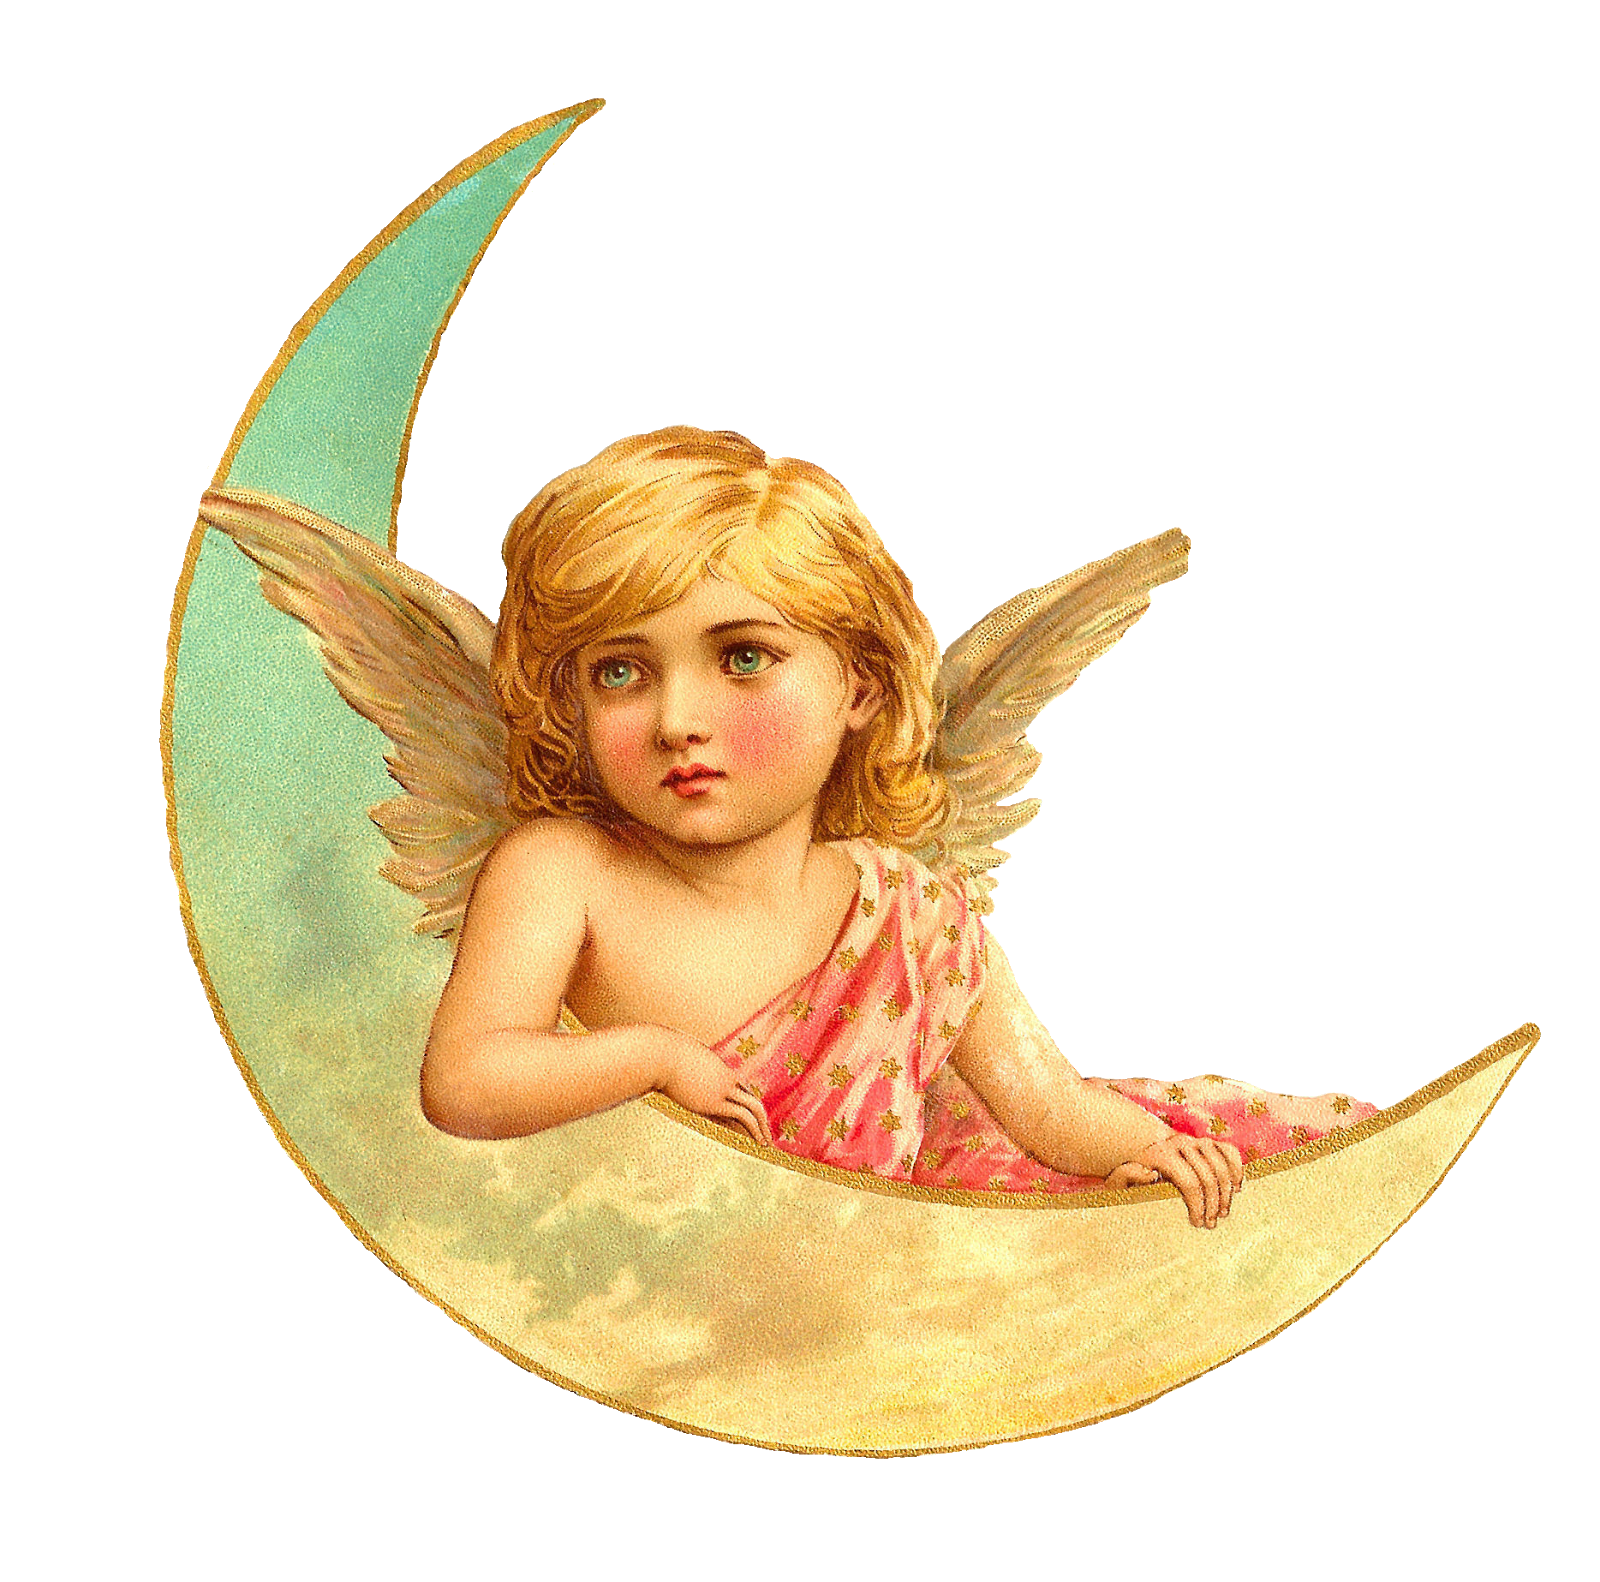 Antique Images: Free Angel Clip Art: Beautiful Angel with Crescent Moon